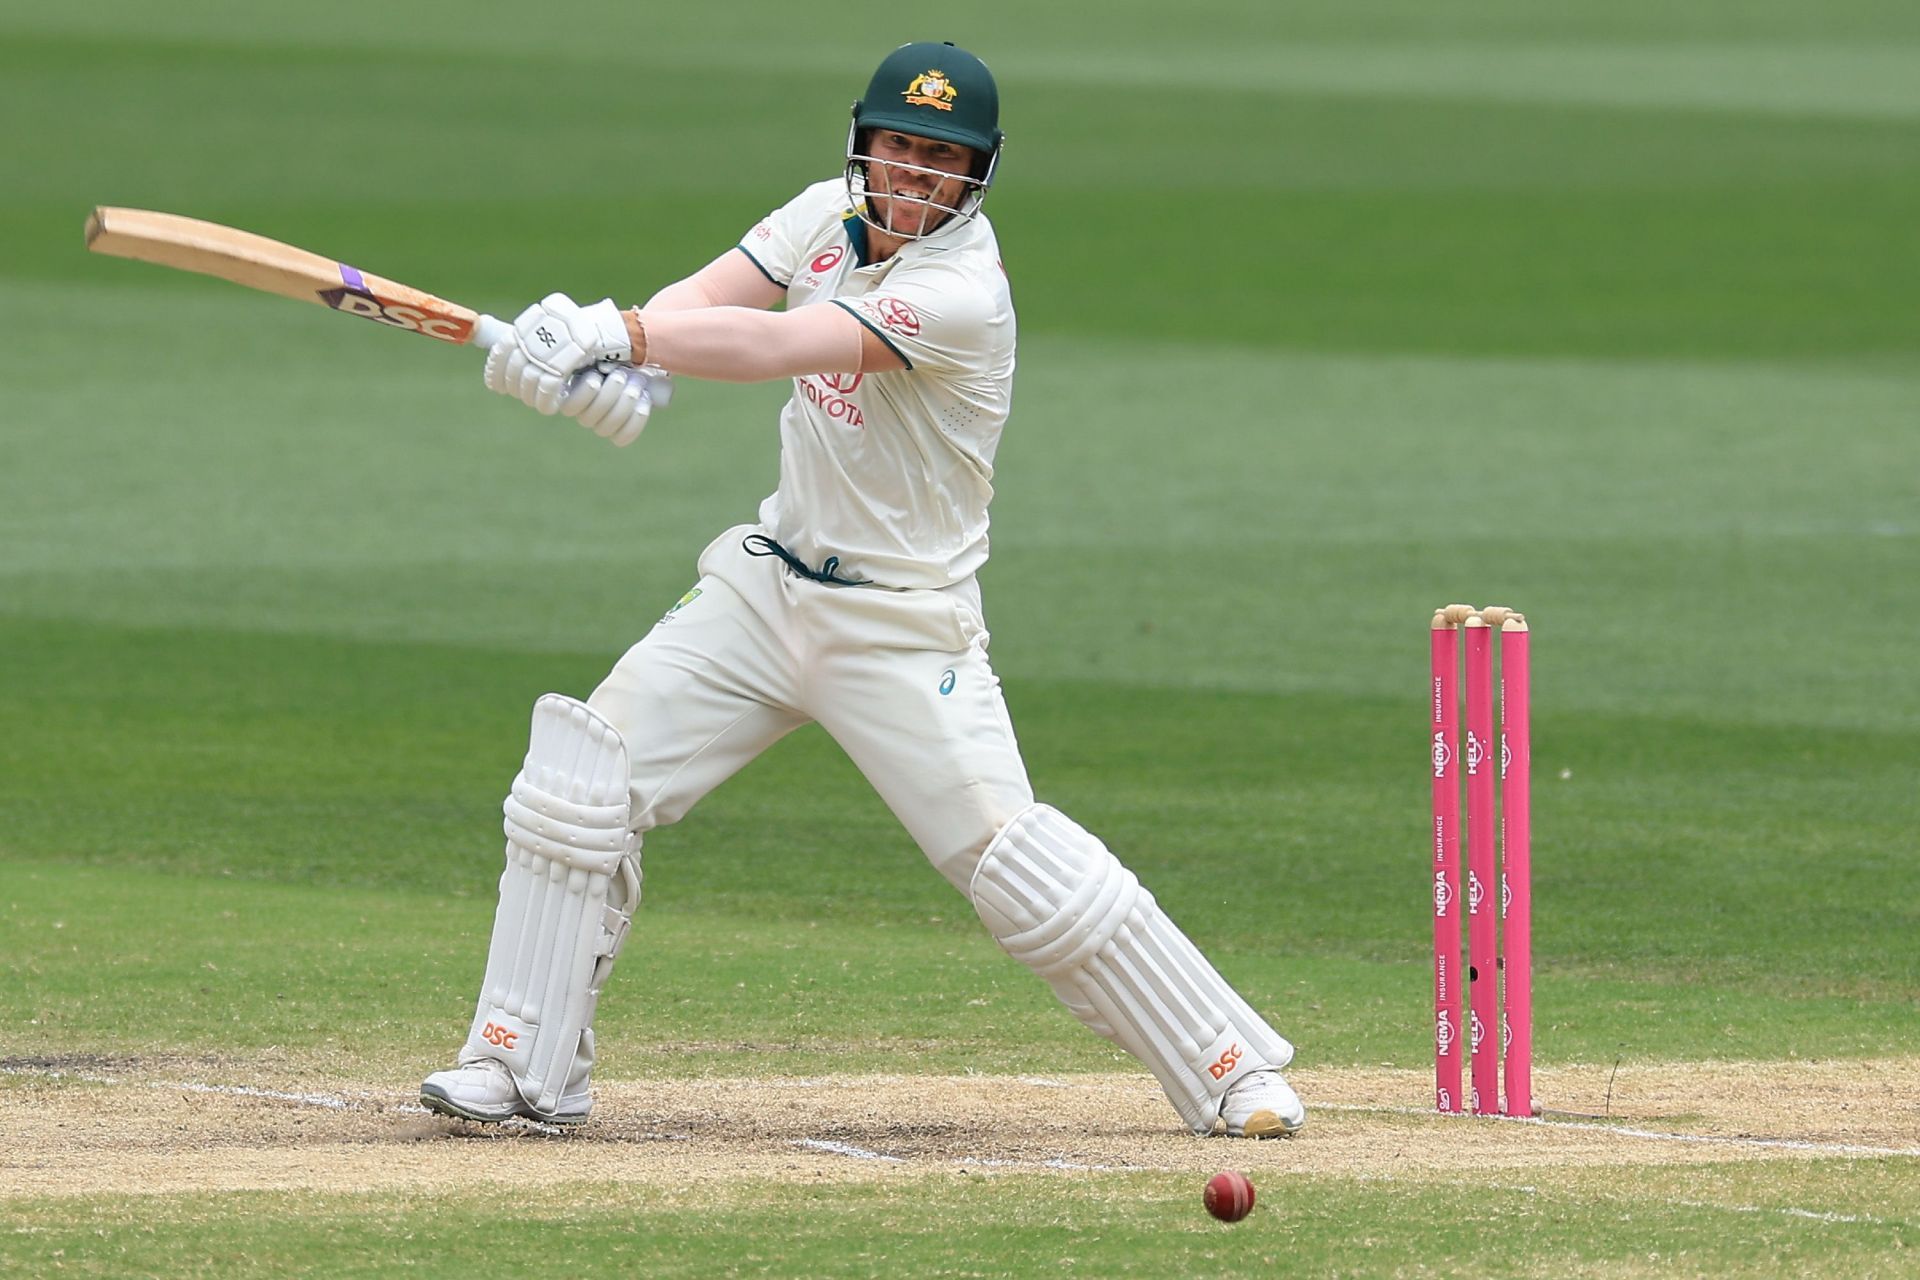 David Warner batting in his final Test match. (Pic: Getty Images)